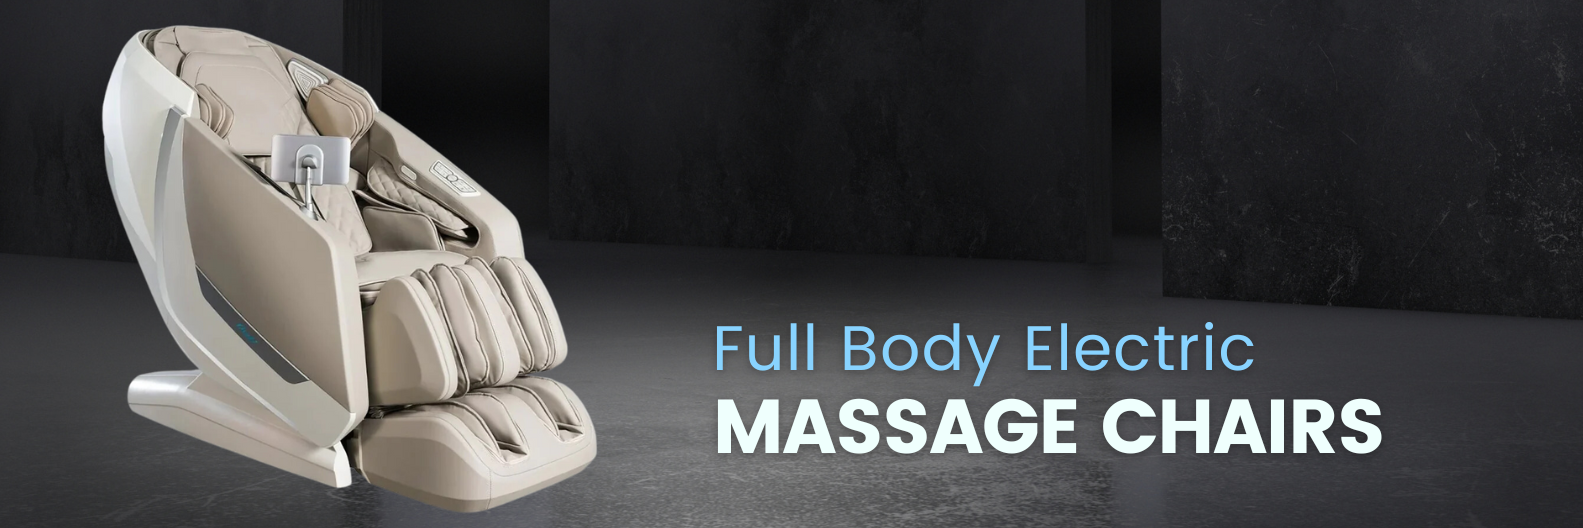 Experience unparalleled comfort with our premium full-body electric massage chair. Enjoy the luxury of reclining, zero-gravity, and electric massage functionalities for an ideal relaxation experience.